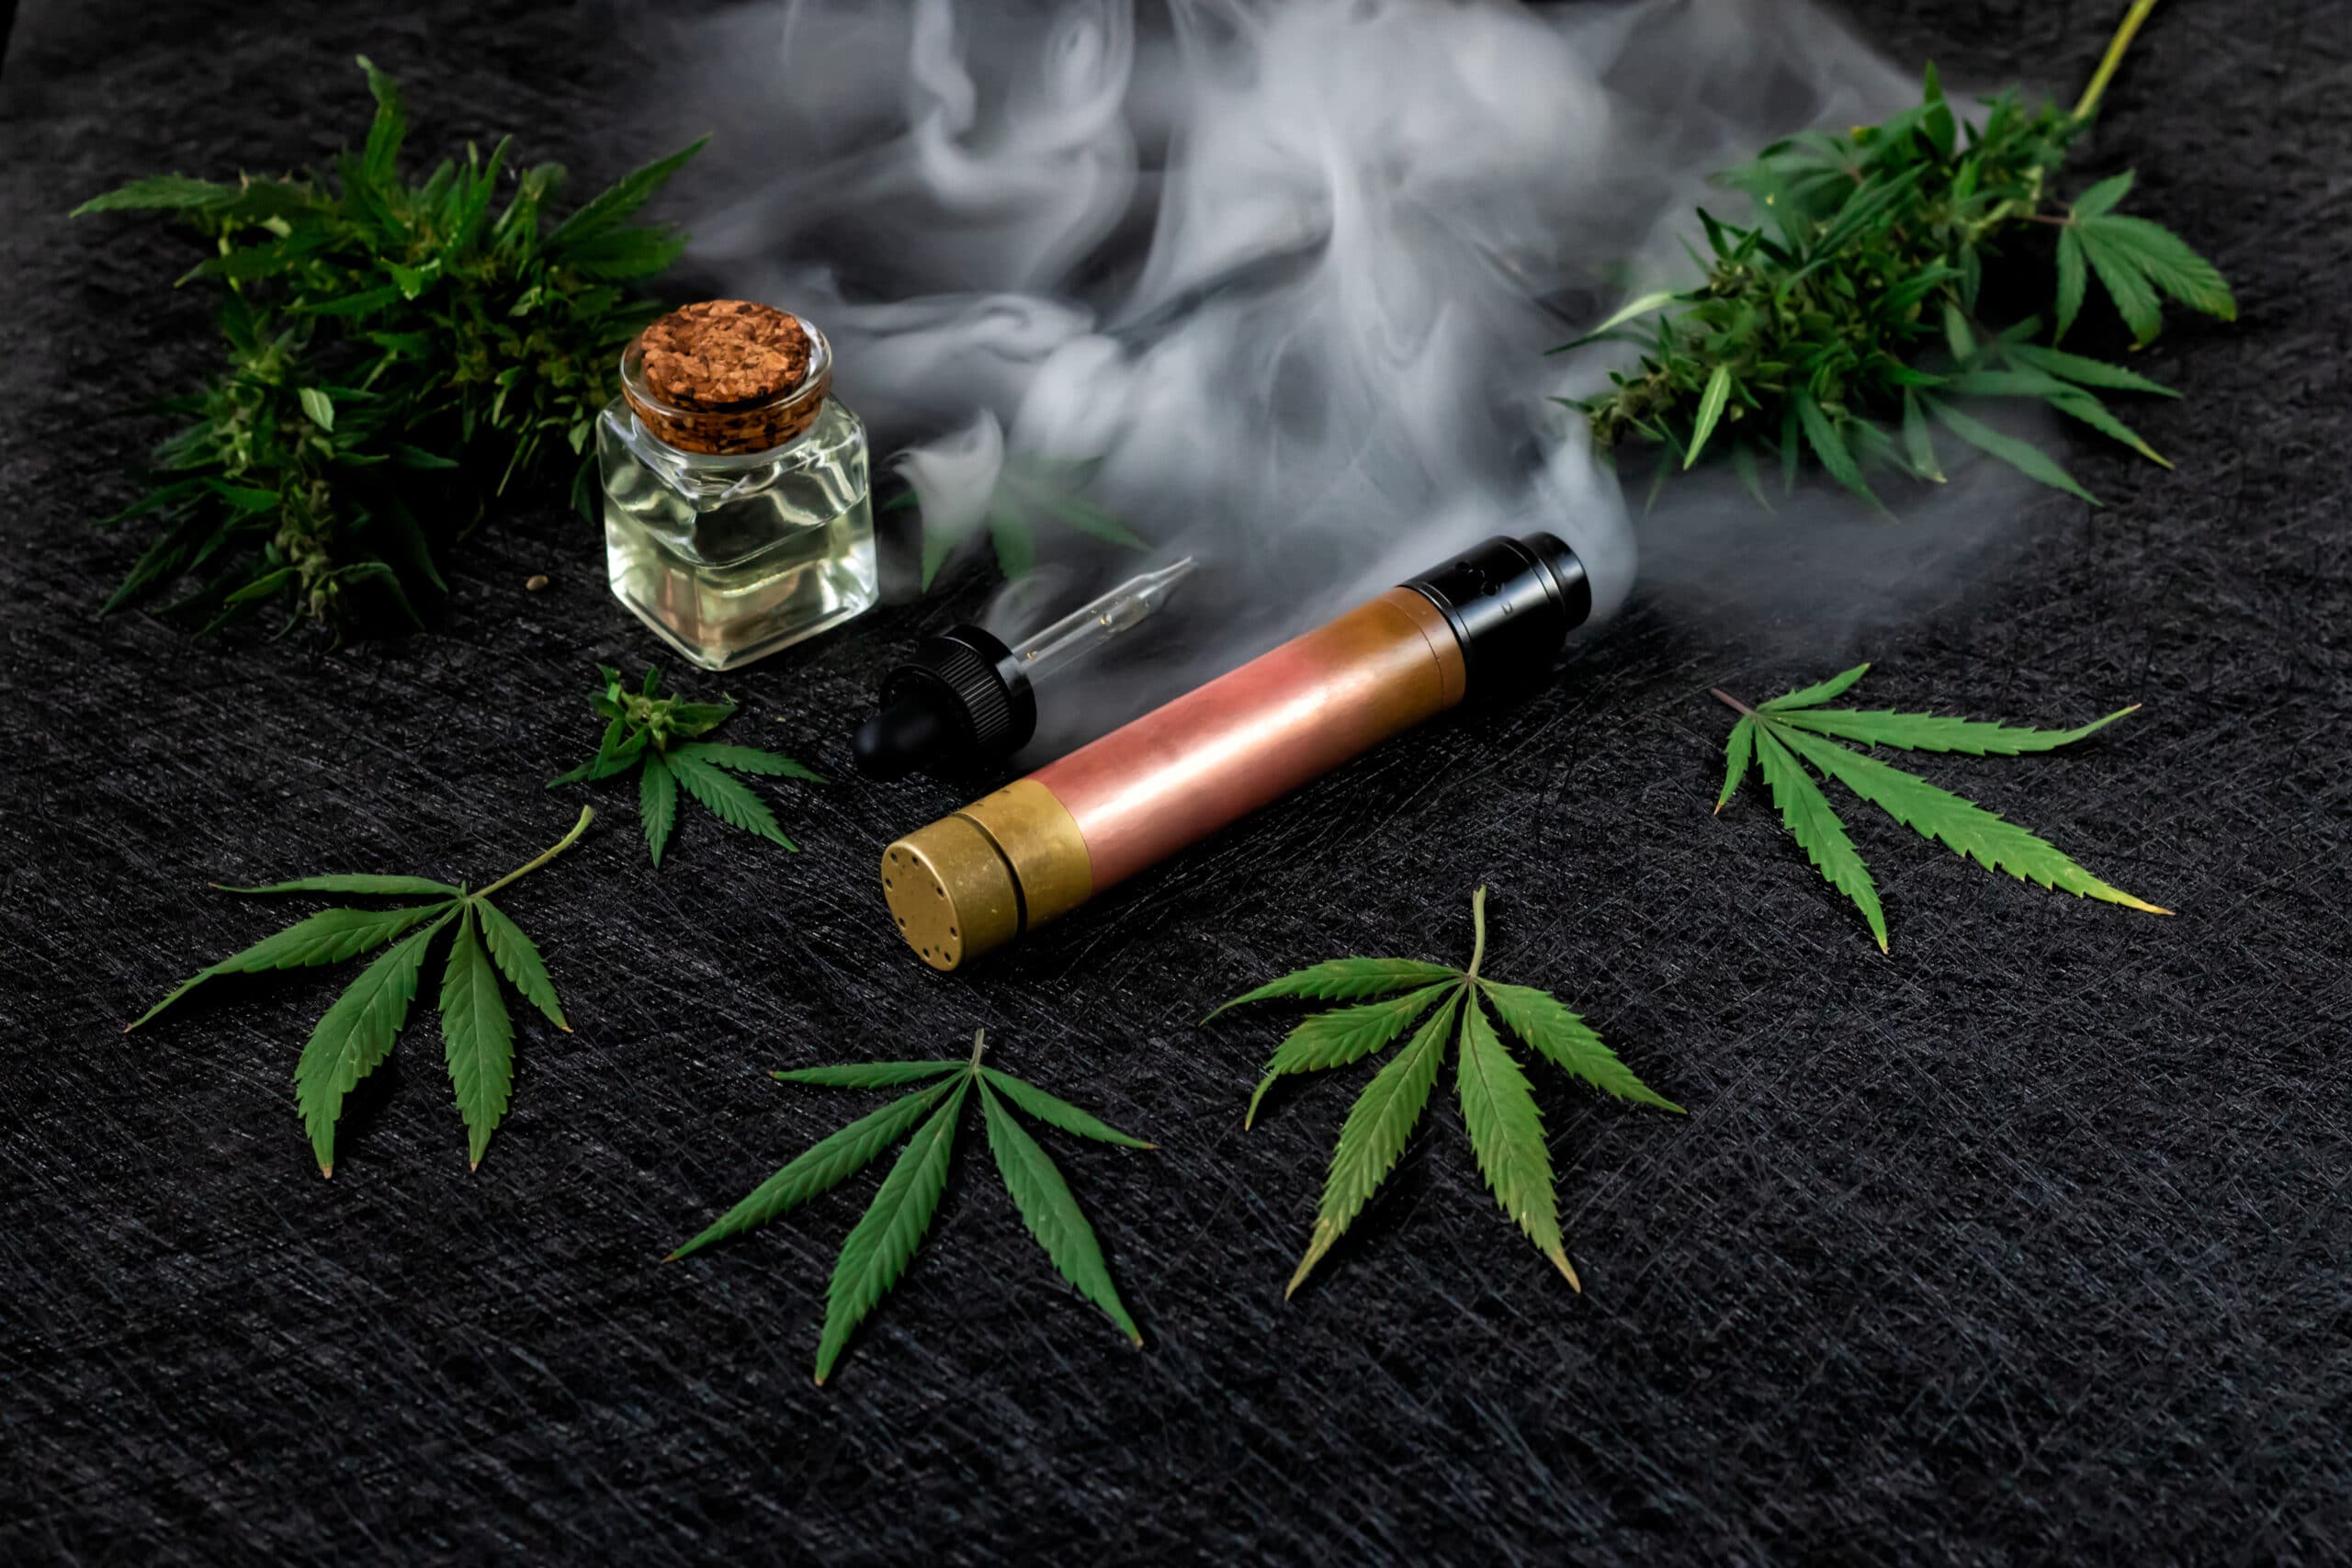 Vape in Brantford | Tonik Cannabis Learn the reasons why vaping is better than smoking. Would you like to know the health benefits of using vape pens? Contact us today to find out more about our products and how you can get started with your own vape kit.